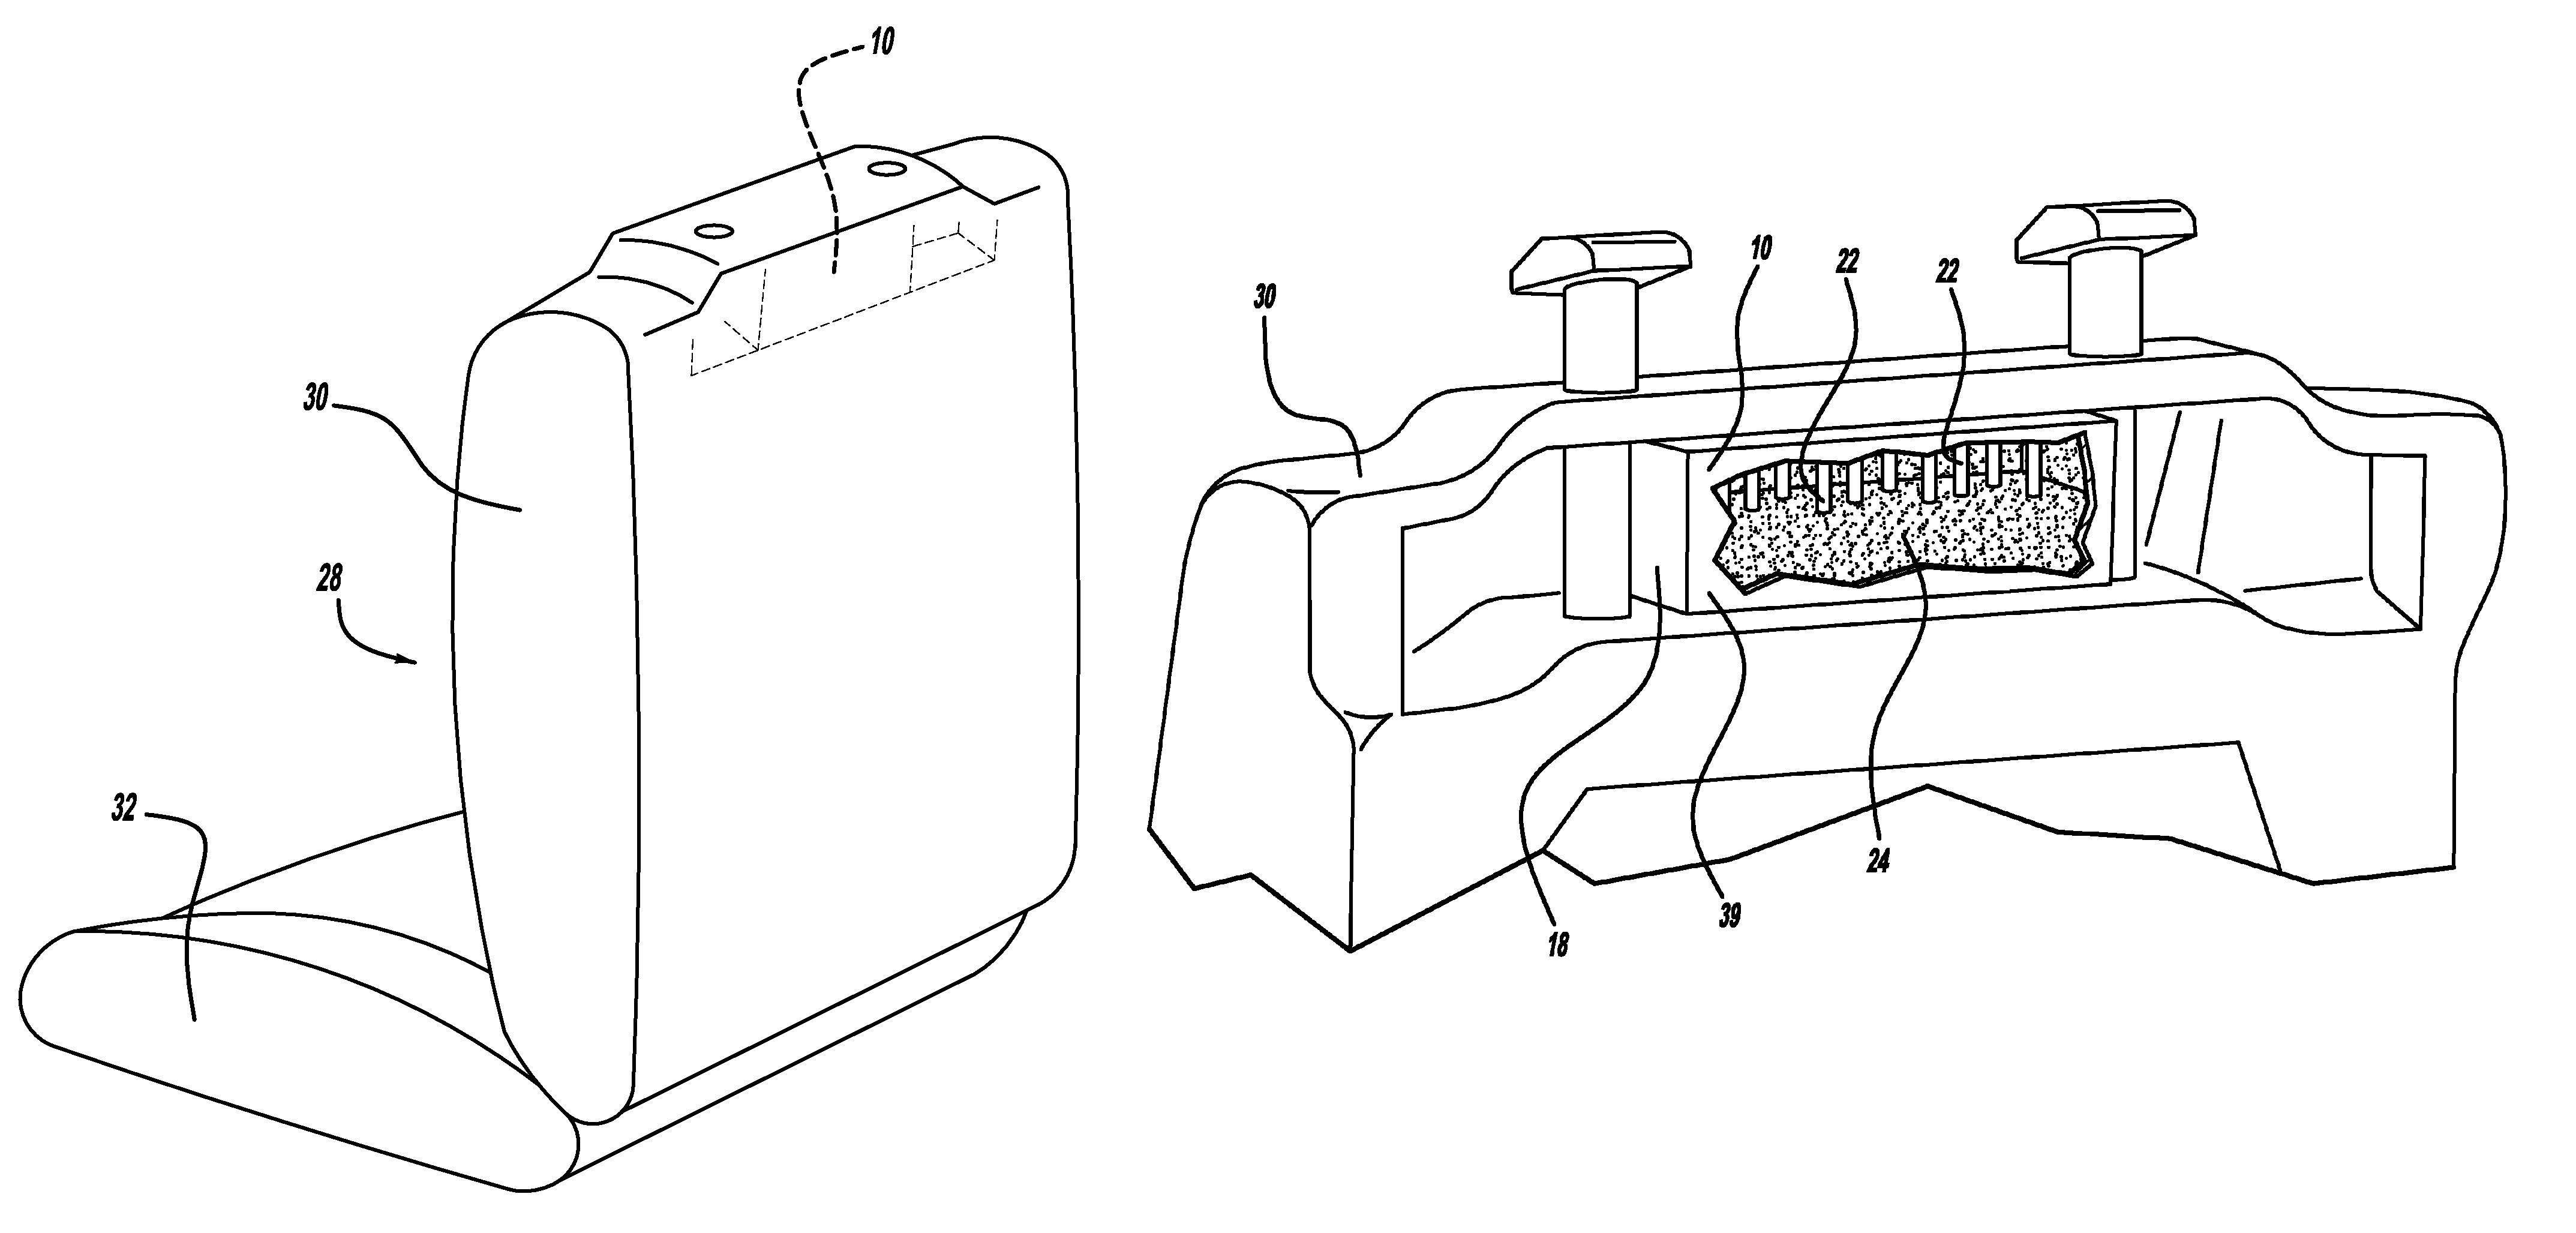 Non-newtonian stress thickening fluid vibration damper system for vehicle seat